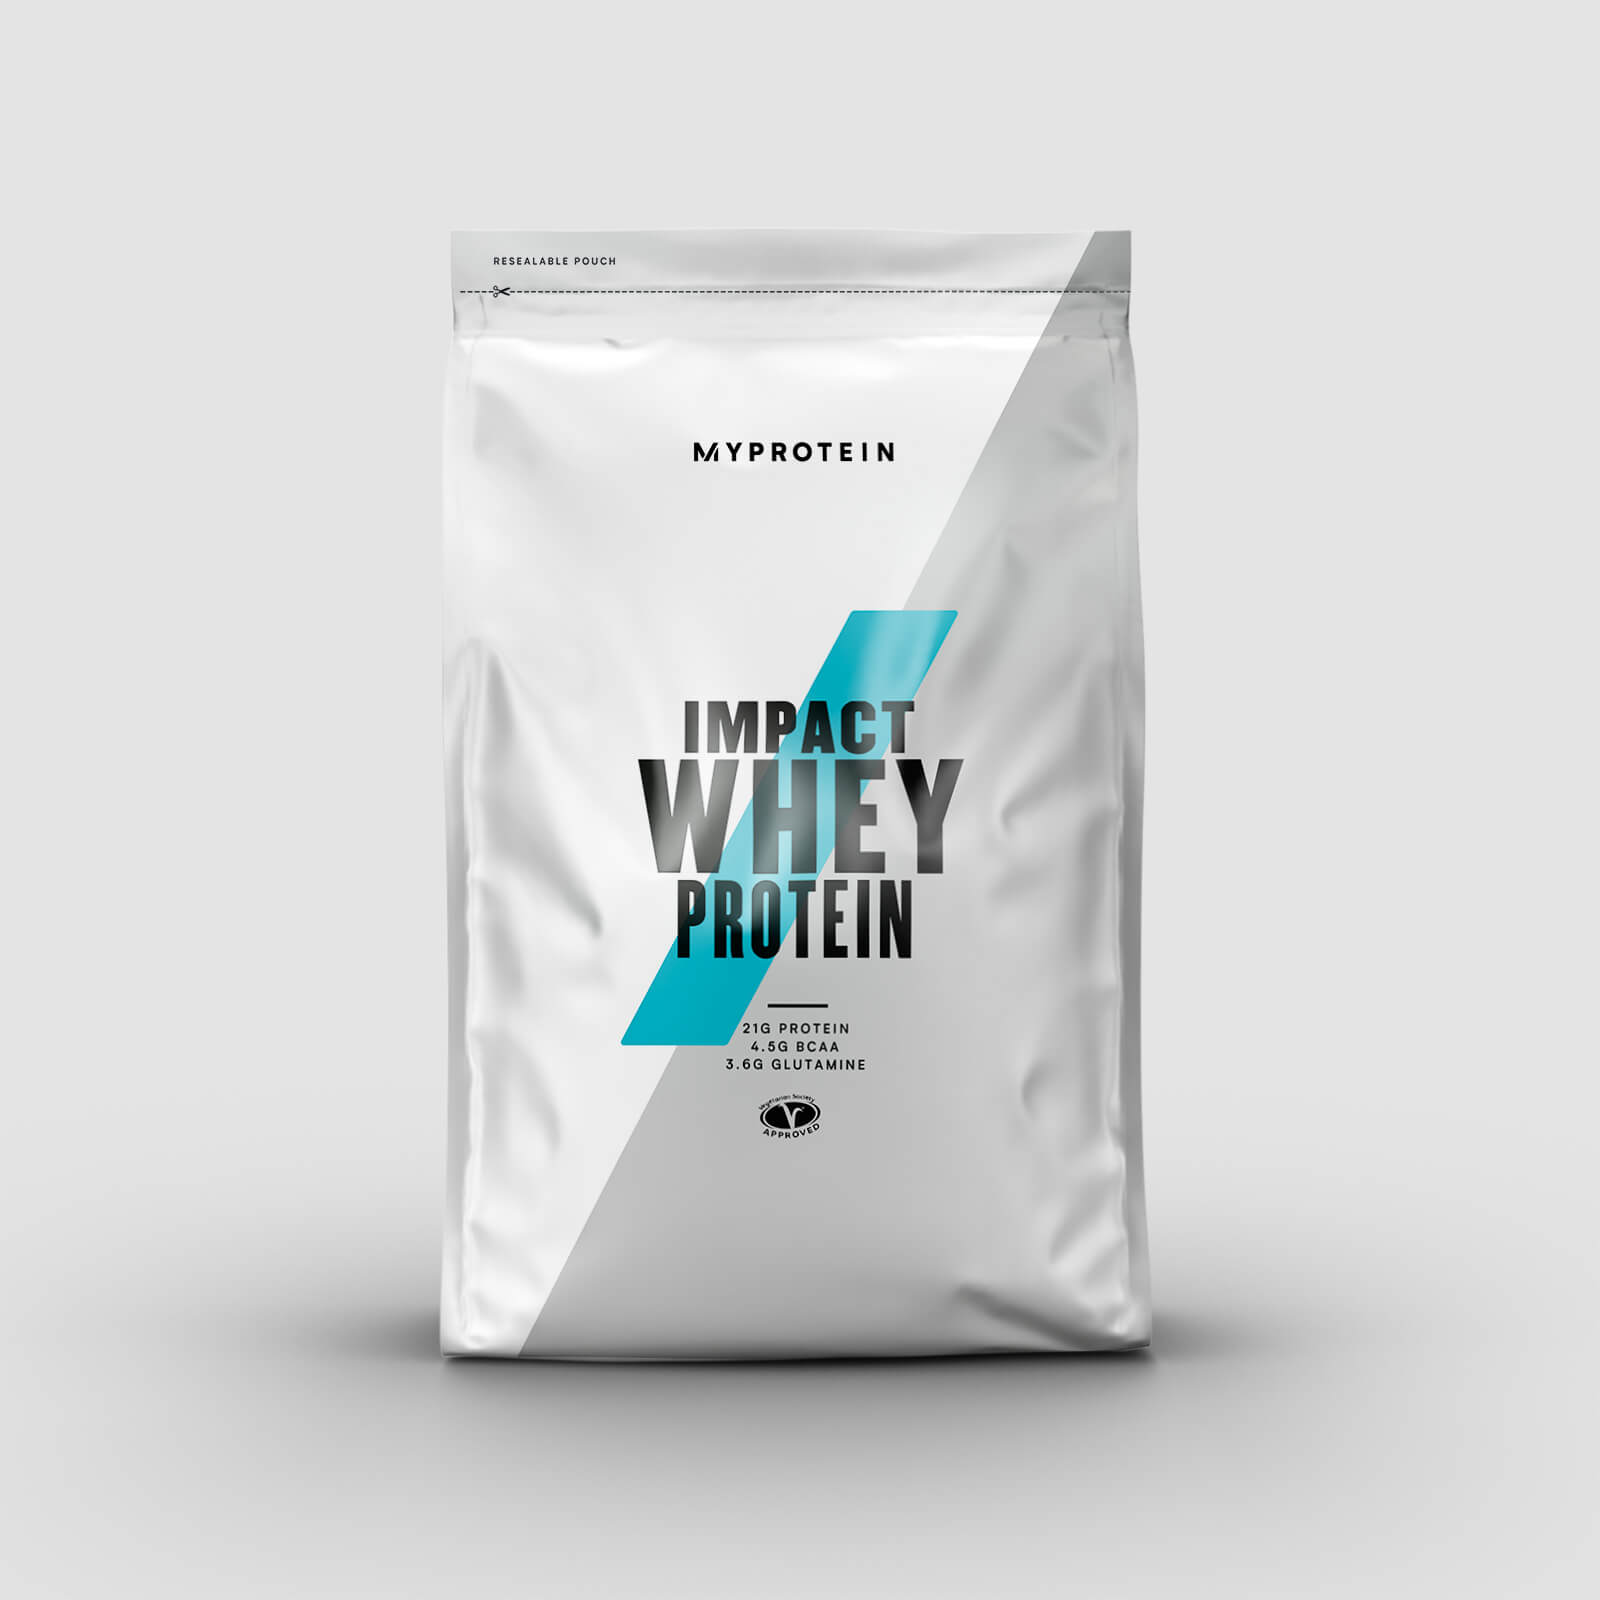 Myprotein Impact Whey Protein - 250g - Chocolate Brownie - New and Improved